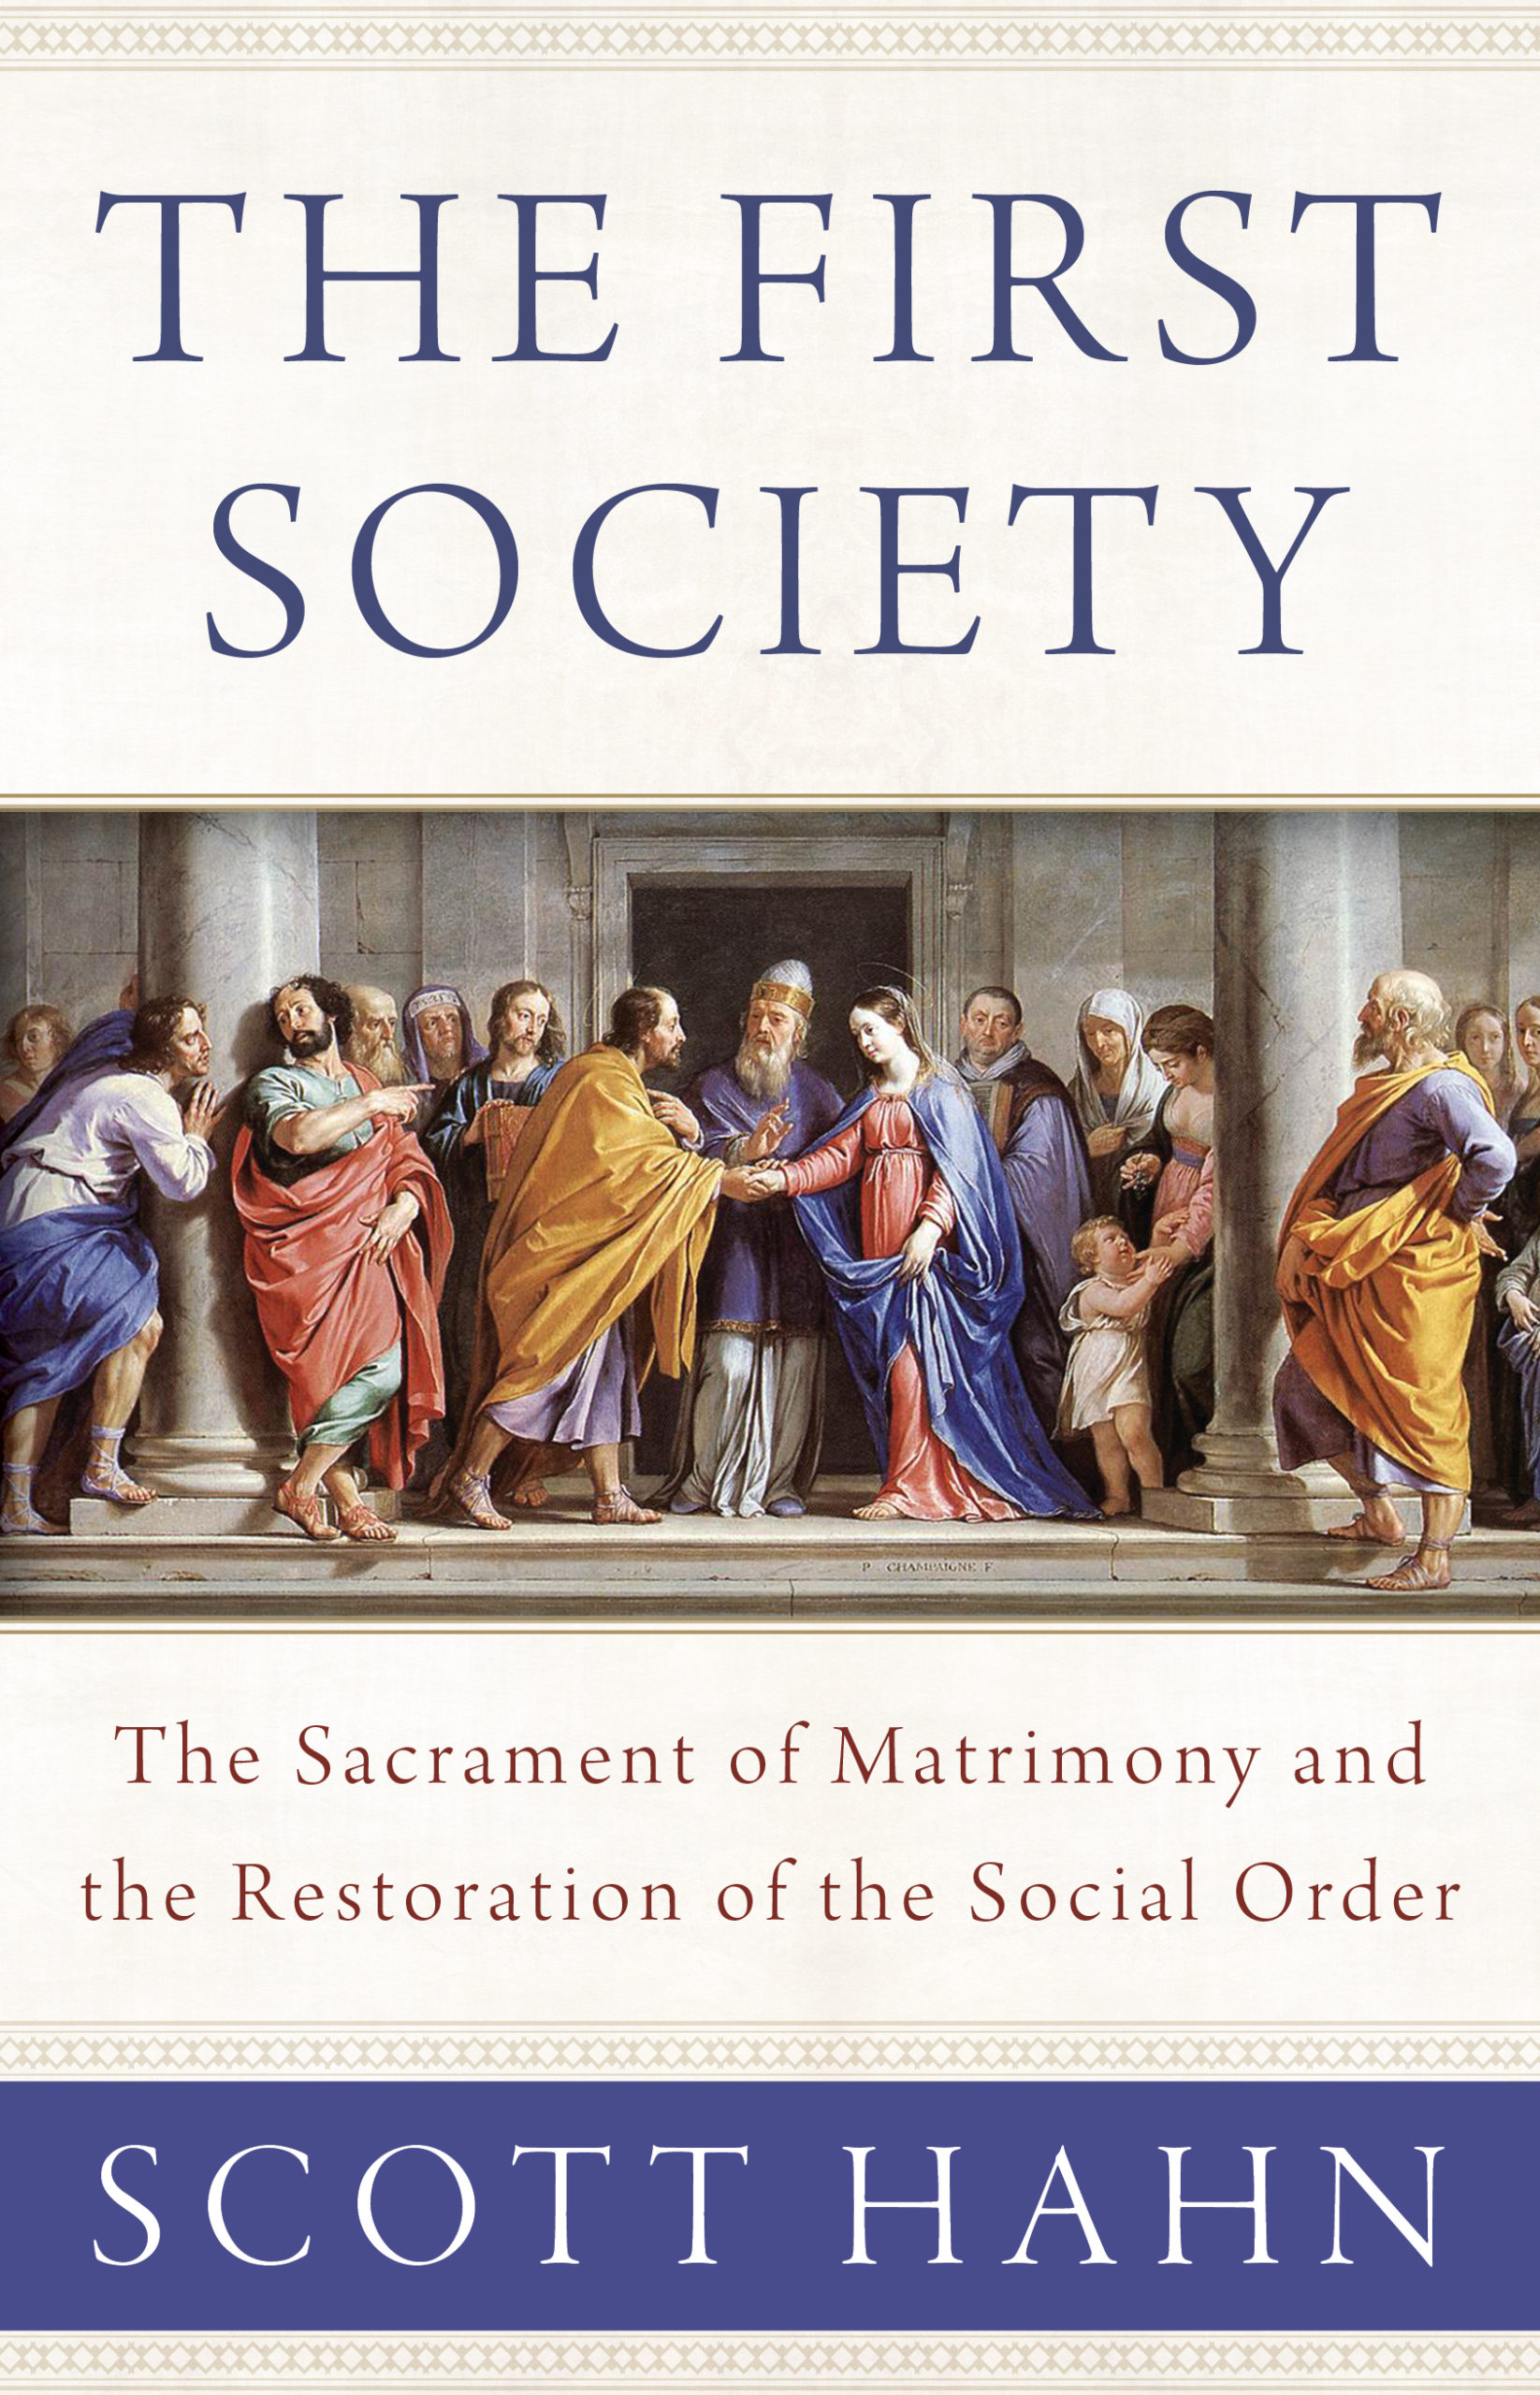 Social　and　Sacrament　the　of　The　The　Restoration　–　of　Order　St.　First　Matrimony　Society:　the　Paul　Center